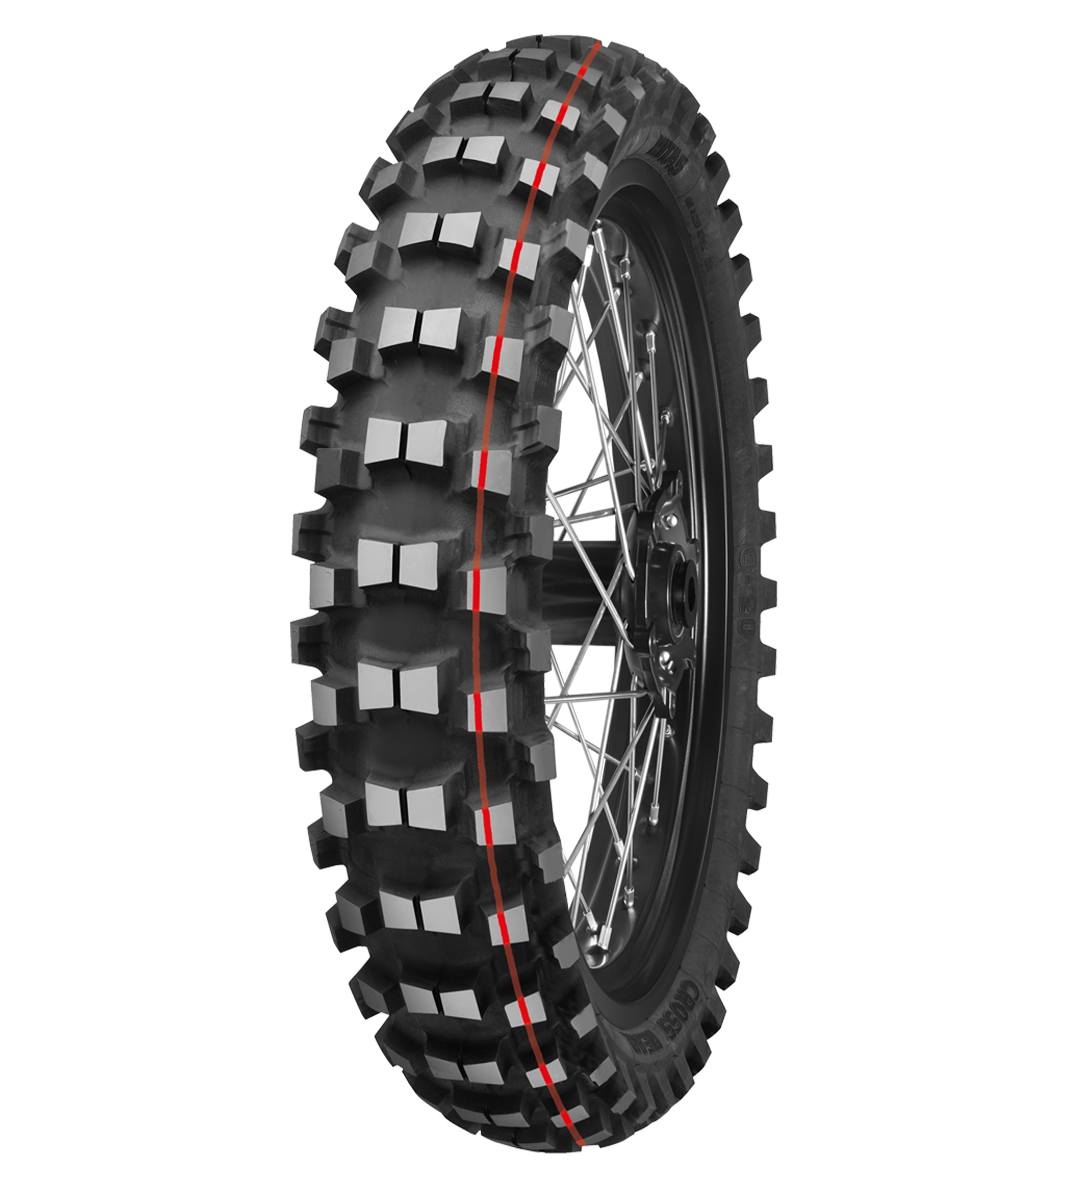 Mitas C-20 STONE KING 90/100-12 Pitcross Off-Road PIT CROSS 46M Red Tube Rear Tire, 226073, 90/100-12, C-20 Stone King, Off-Road, Pitcross, Rear, Tires - Imported and distributed in North & South America by Lindeco Genuine Powersports - Premier Powersports Equipment and Accessories for Motorcycle Enthusiasts, Professional Riders and Dealers.